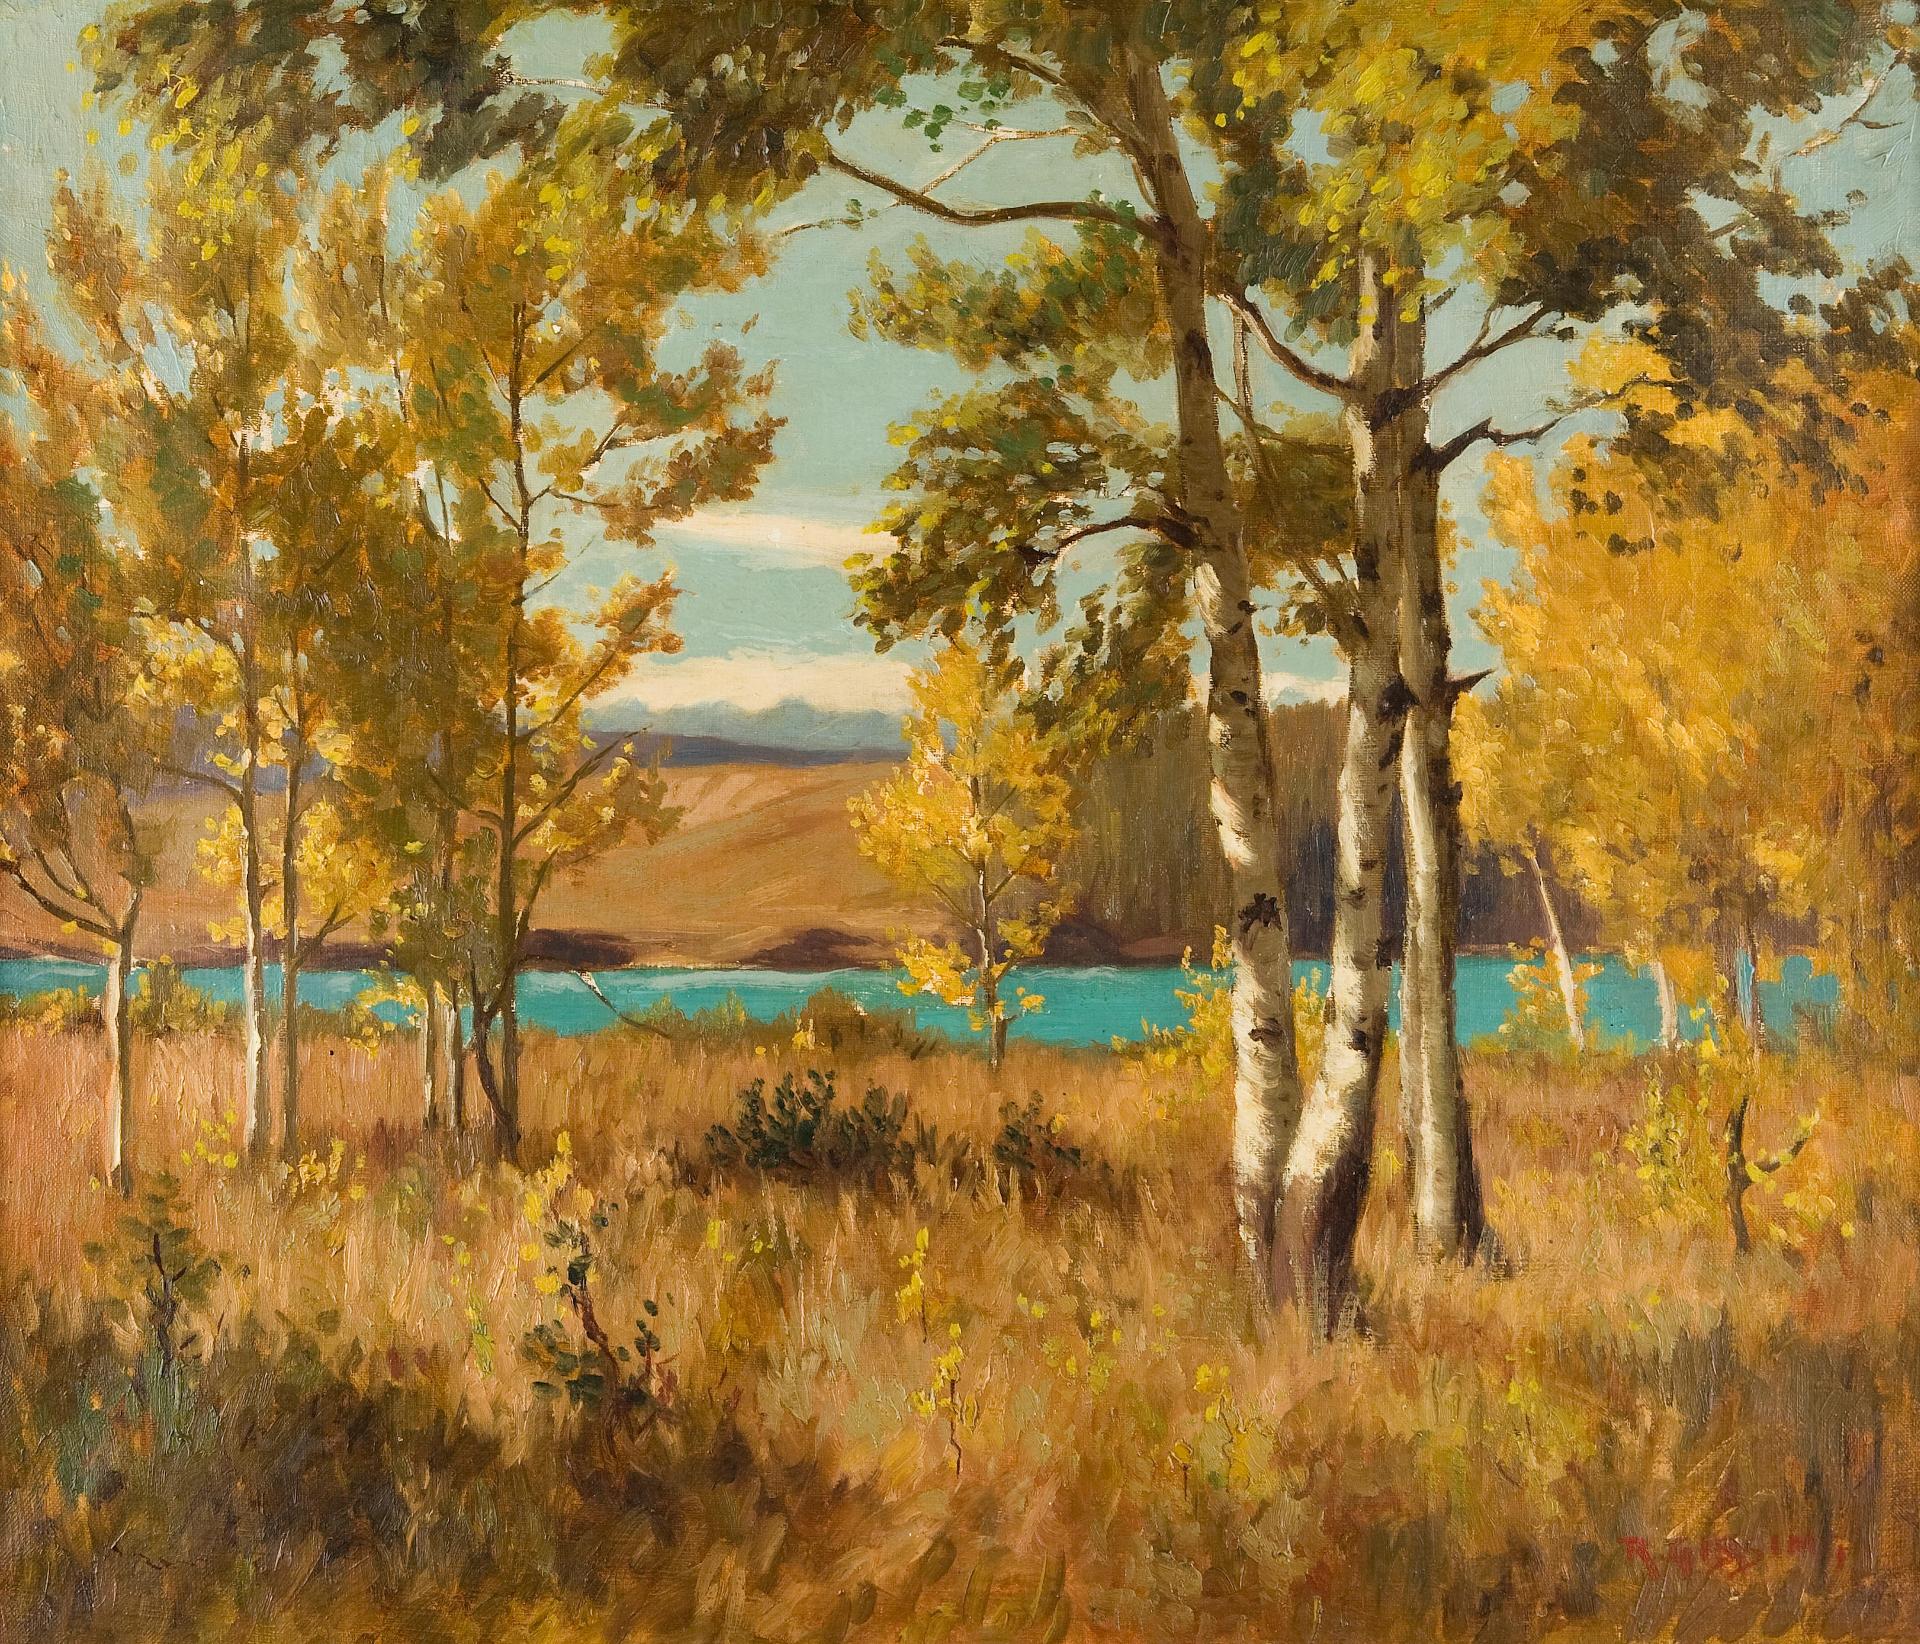 Roland Gissing (1895-1967) - Autumn in the foothills